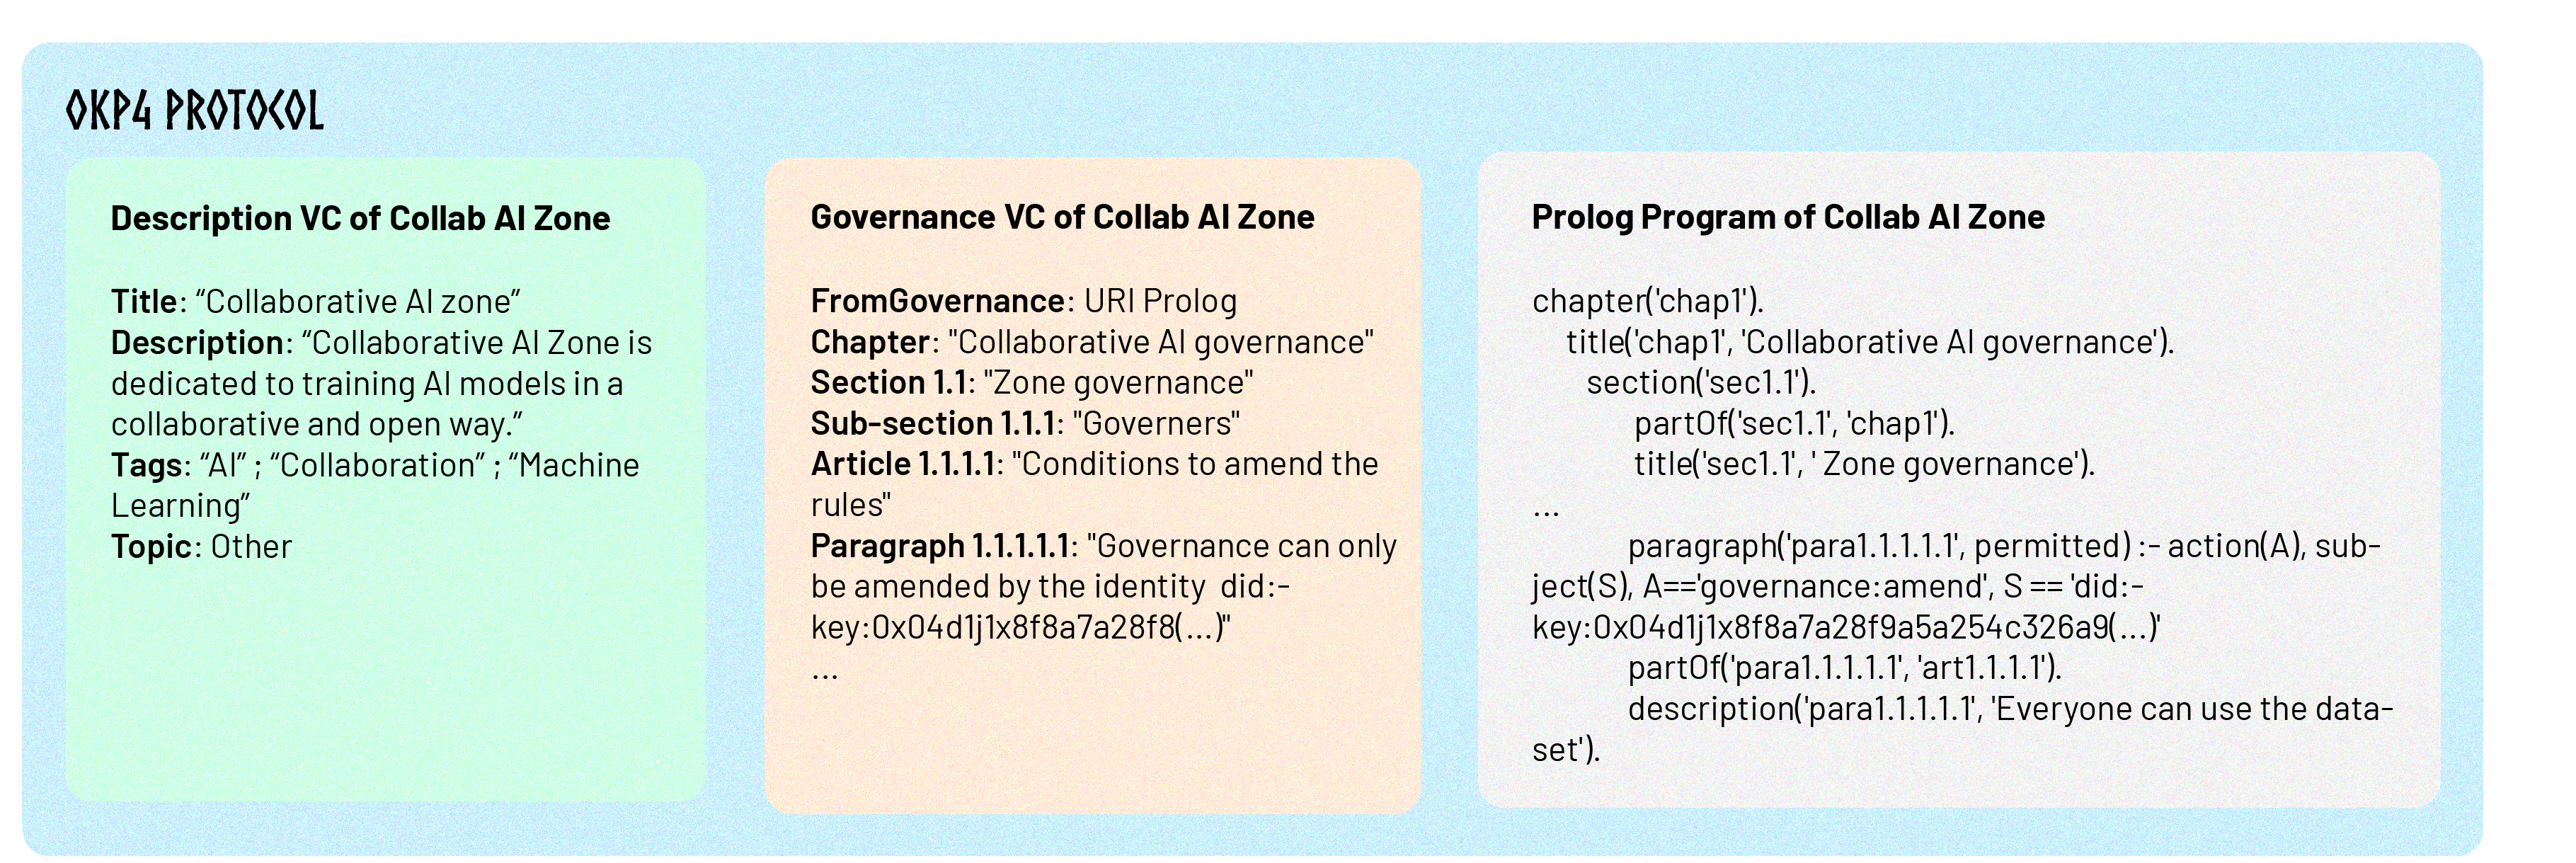 Governance elements for Zone in Axone Protocol